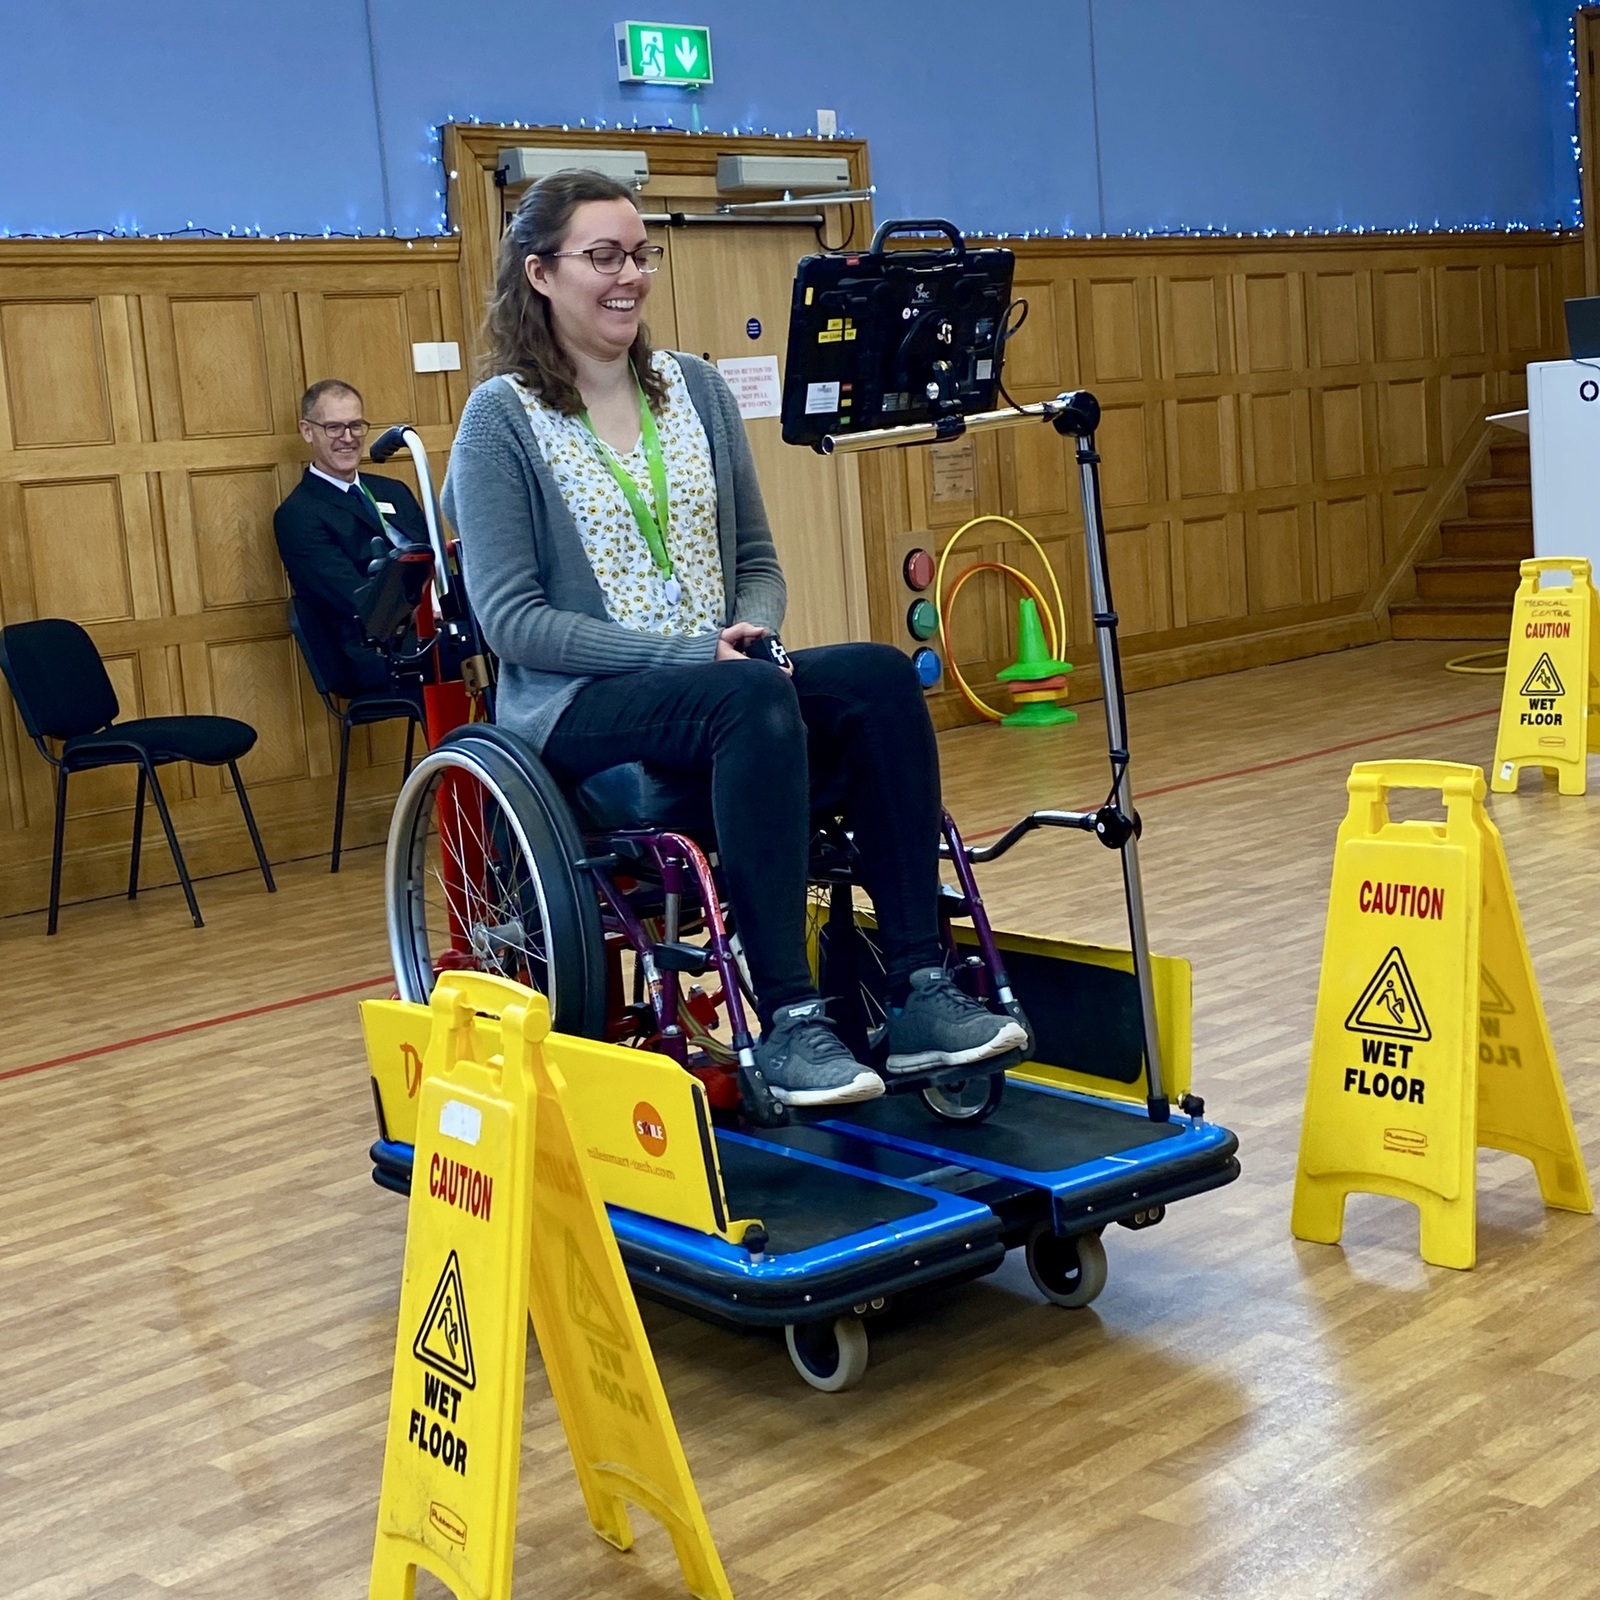 7 Mar 23 - Paid an inspirational visit to Treloar’s the outstanding school and college founded by a former Lord Mayor who’s 800 dedicated staff care for and develop the skills of 125 severely disabled youngsters ranging from 5 to 25.